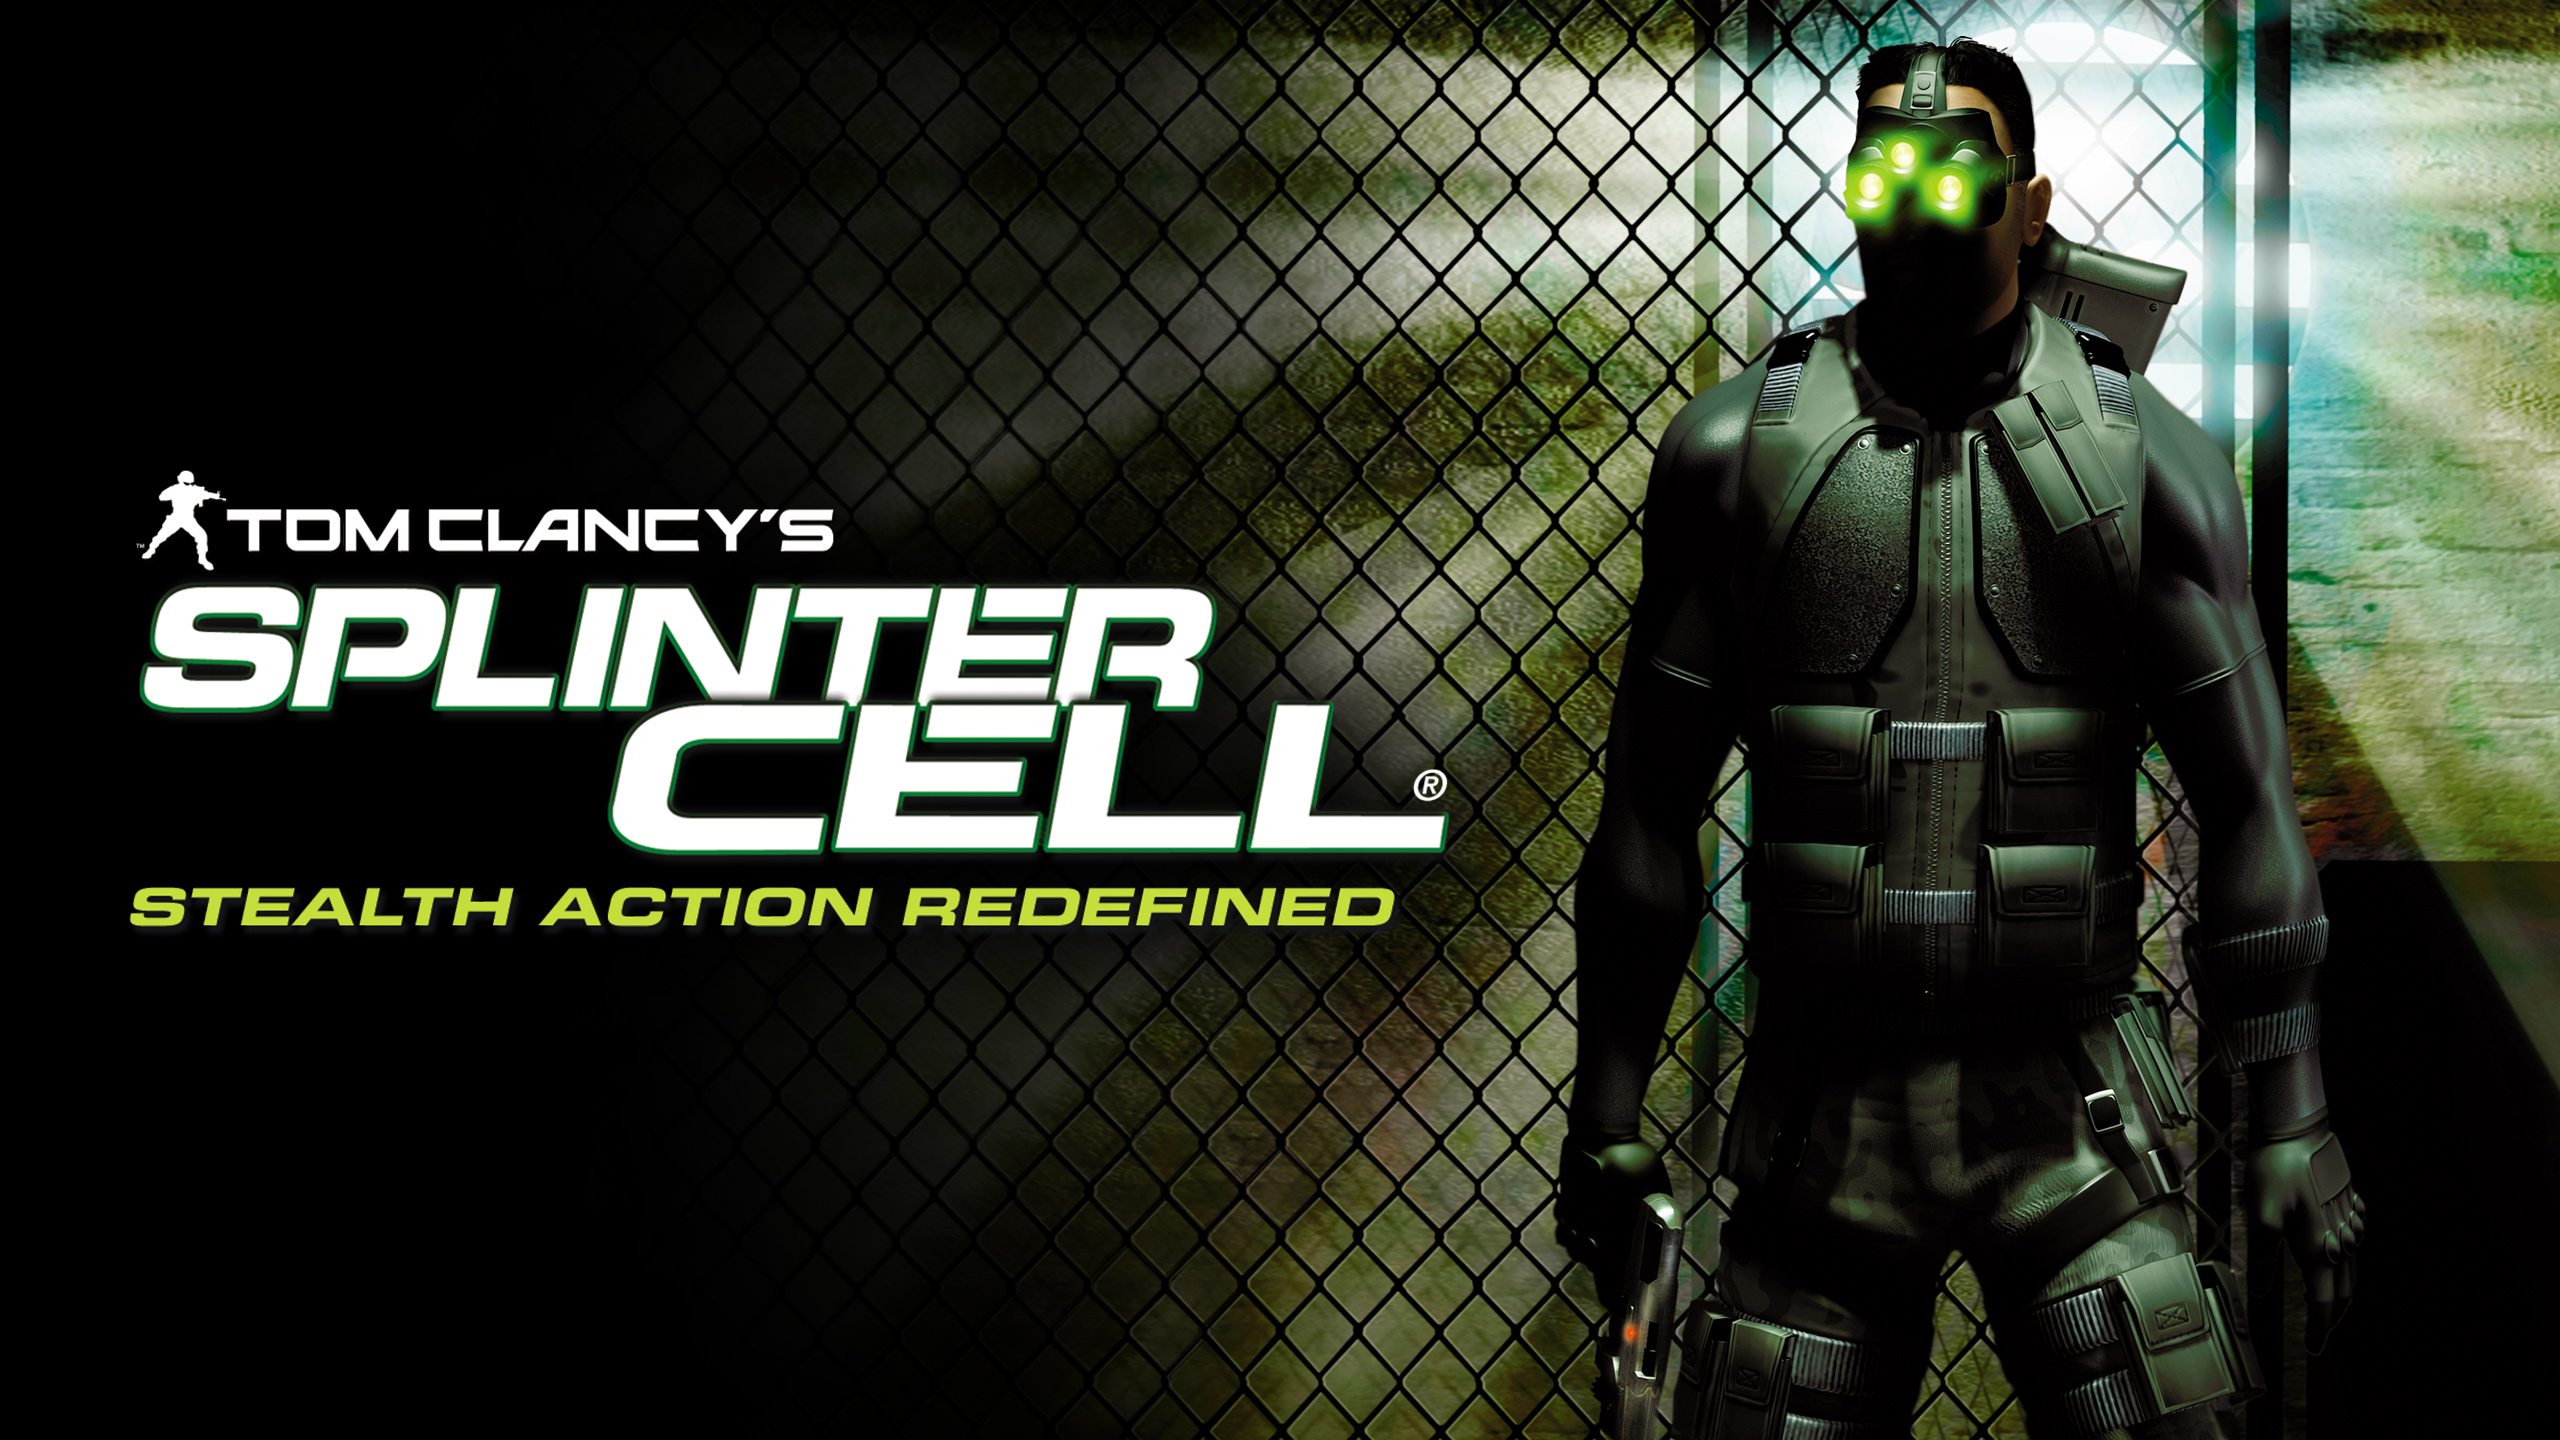 Ubisoft rebooting Splinter Cell franchise with new remake - CNET